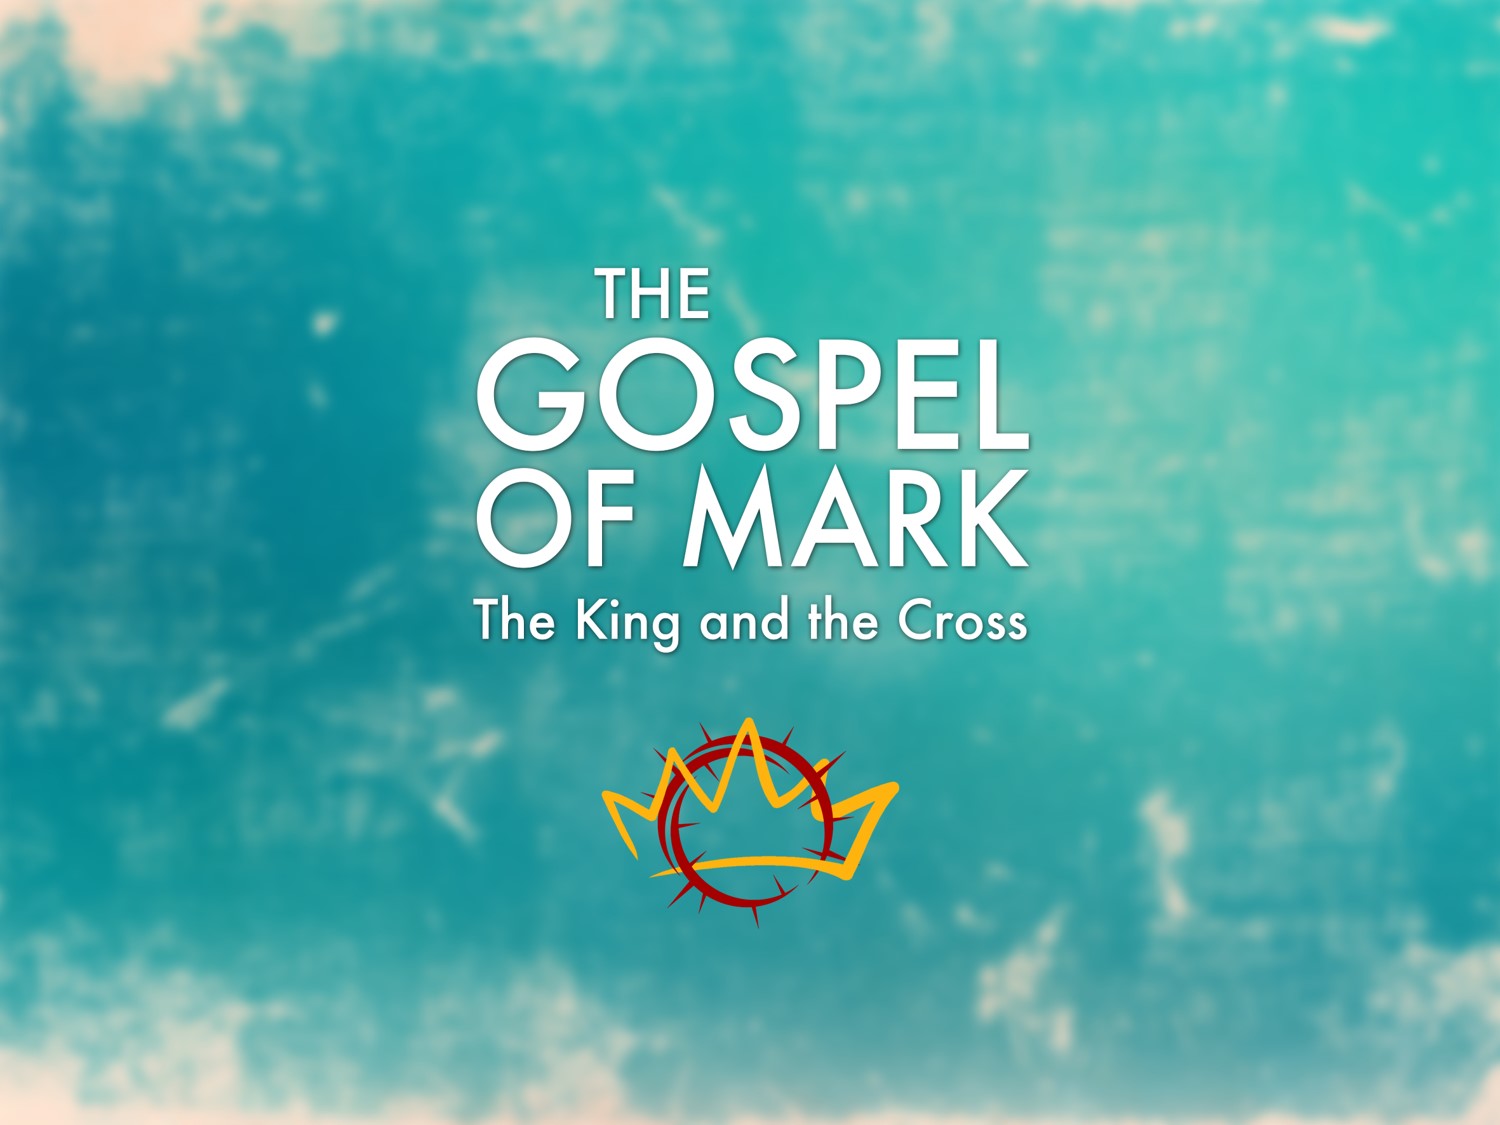 The Gospel of Mark: The King and the Cross